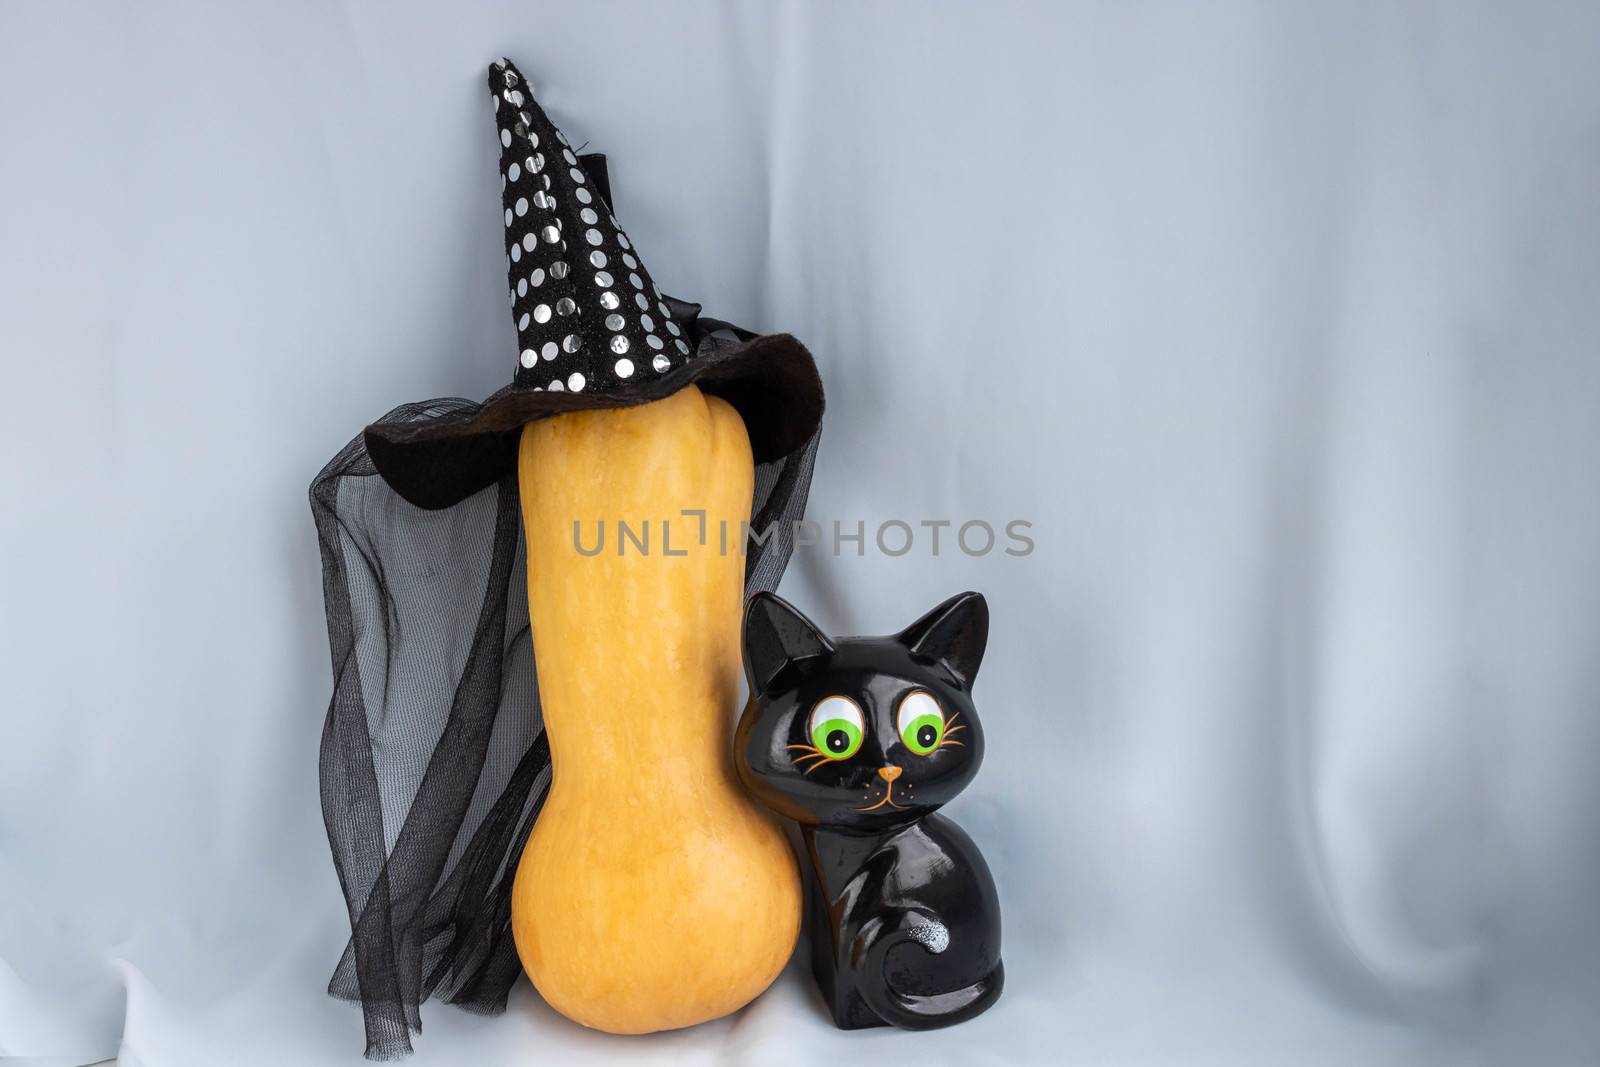 Happy Halloween. A black cat toy hides behind a pumpkin in a witch's hat.